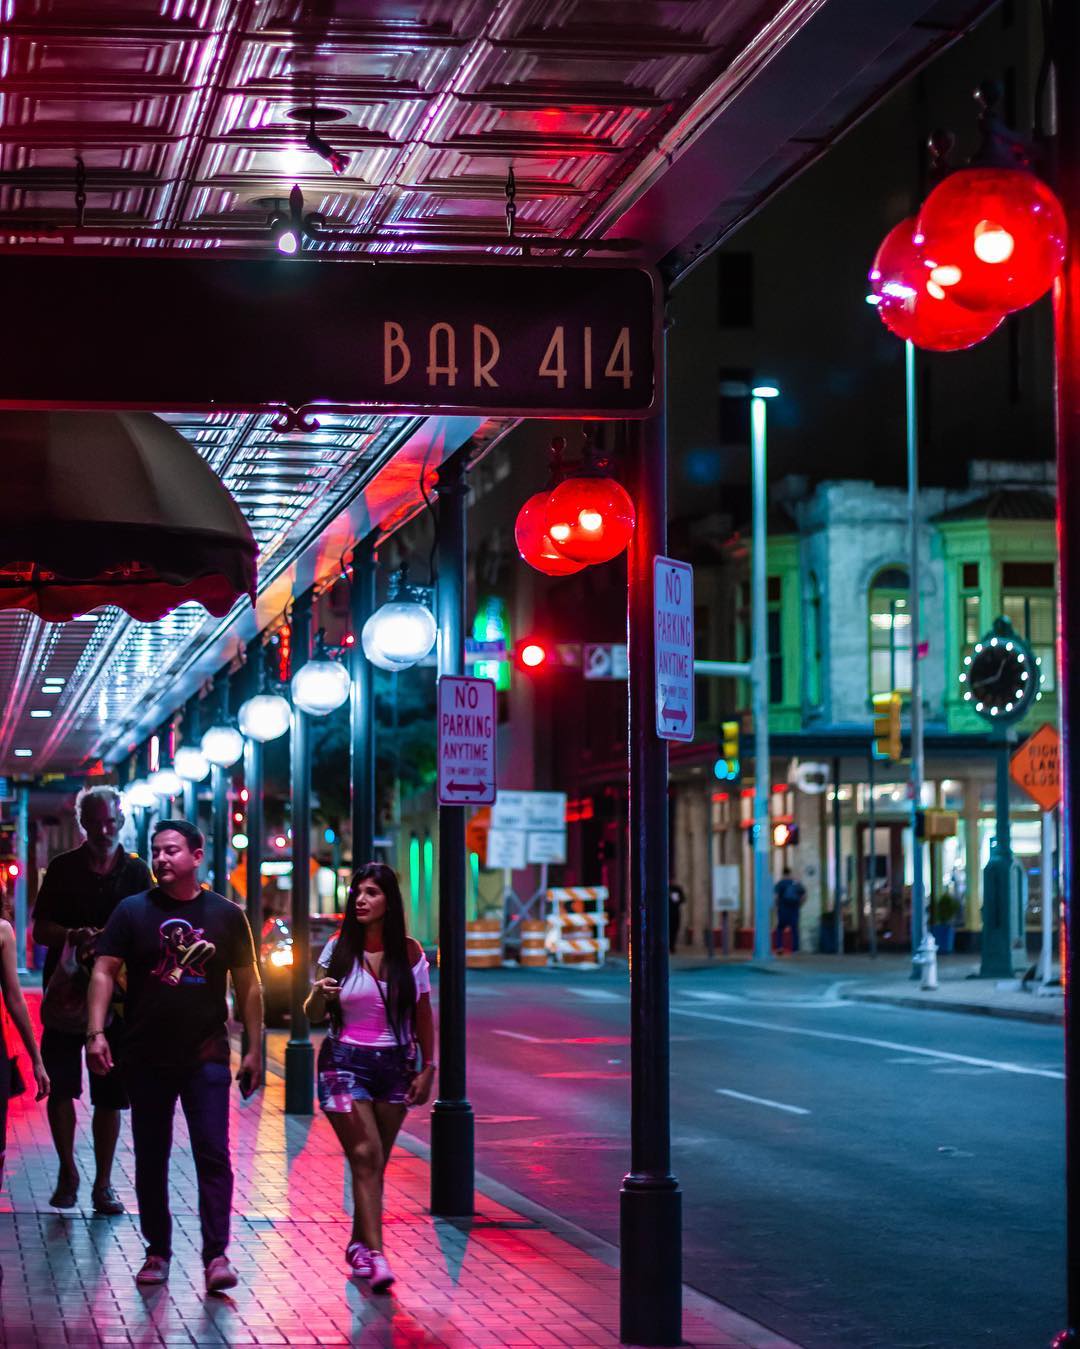 People walking down the street in front of Bar 414 in San Antonio, TX. Photo by Instagram user @gillyaguilar